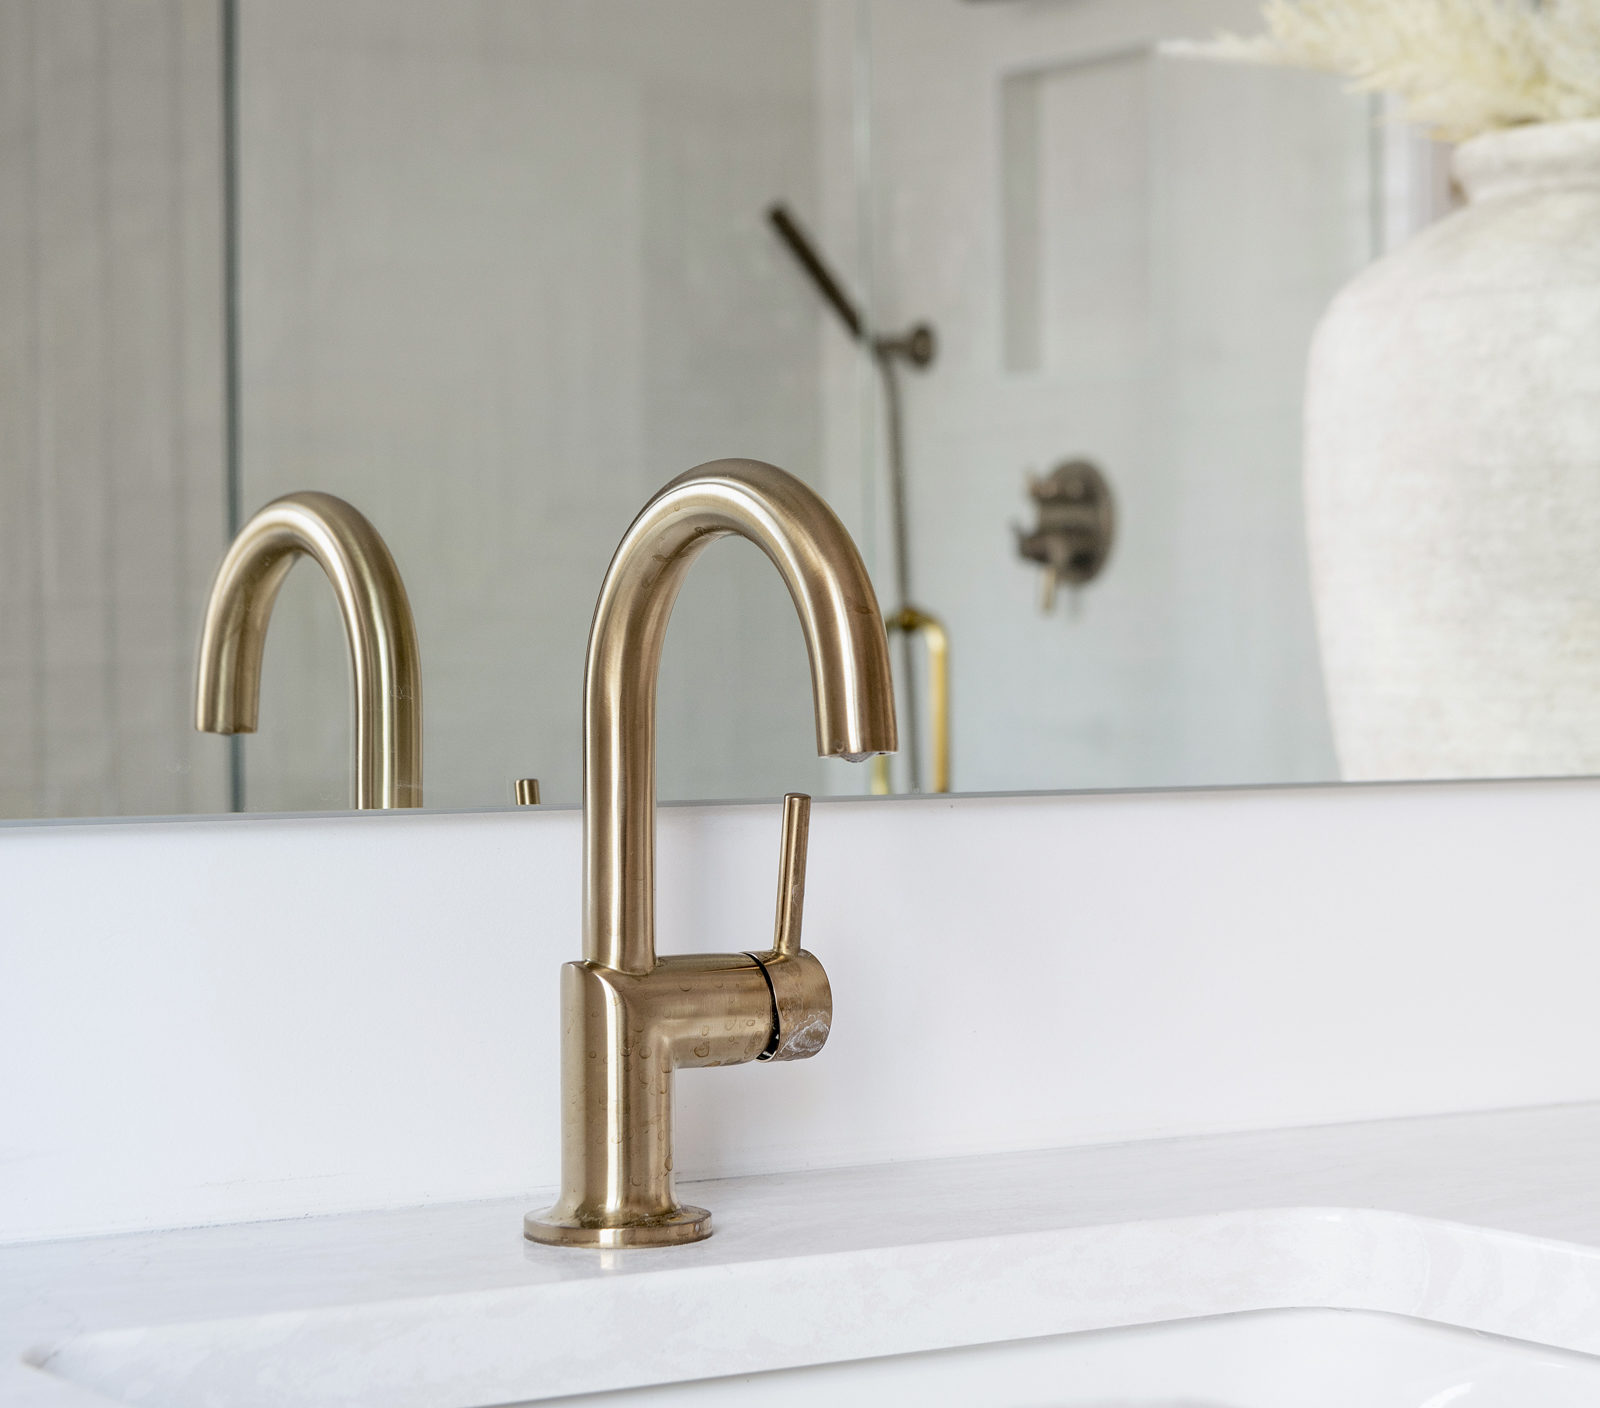 Gold bathroom faucet | construction2style